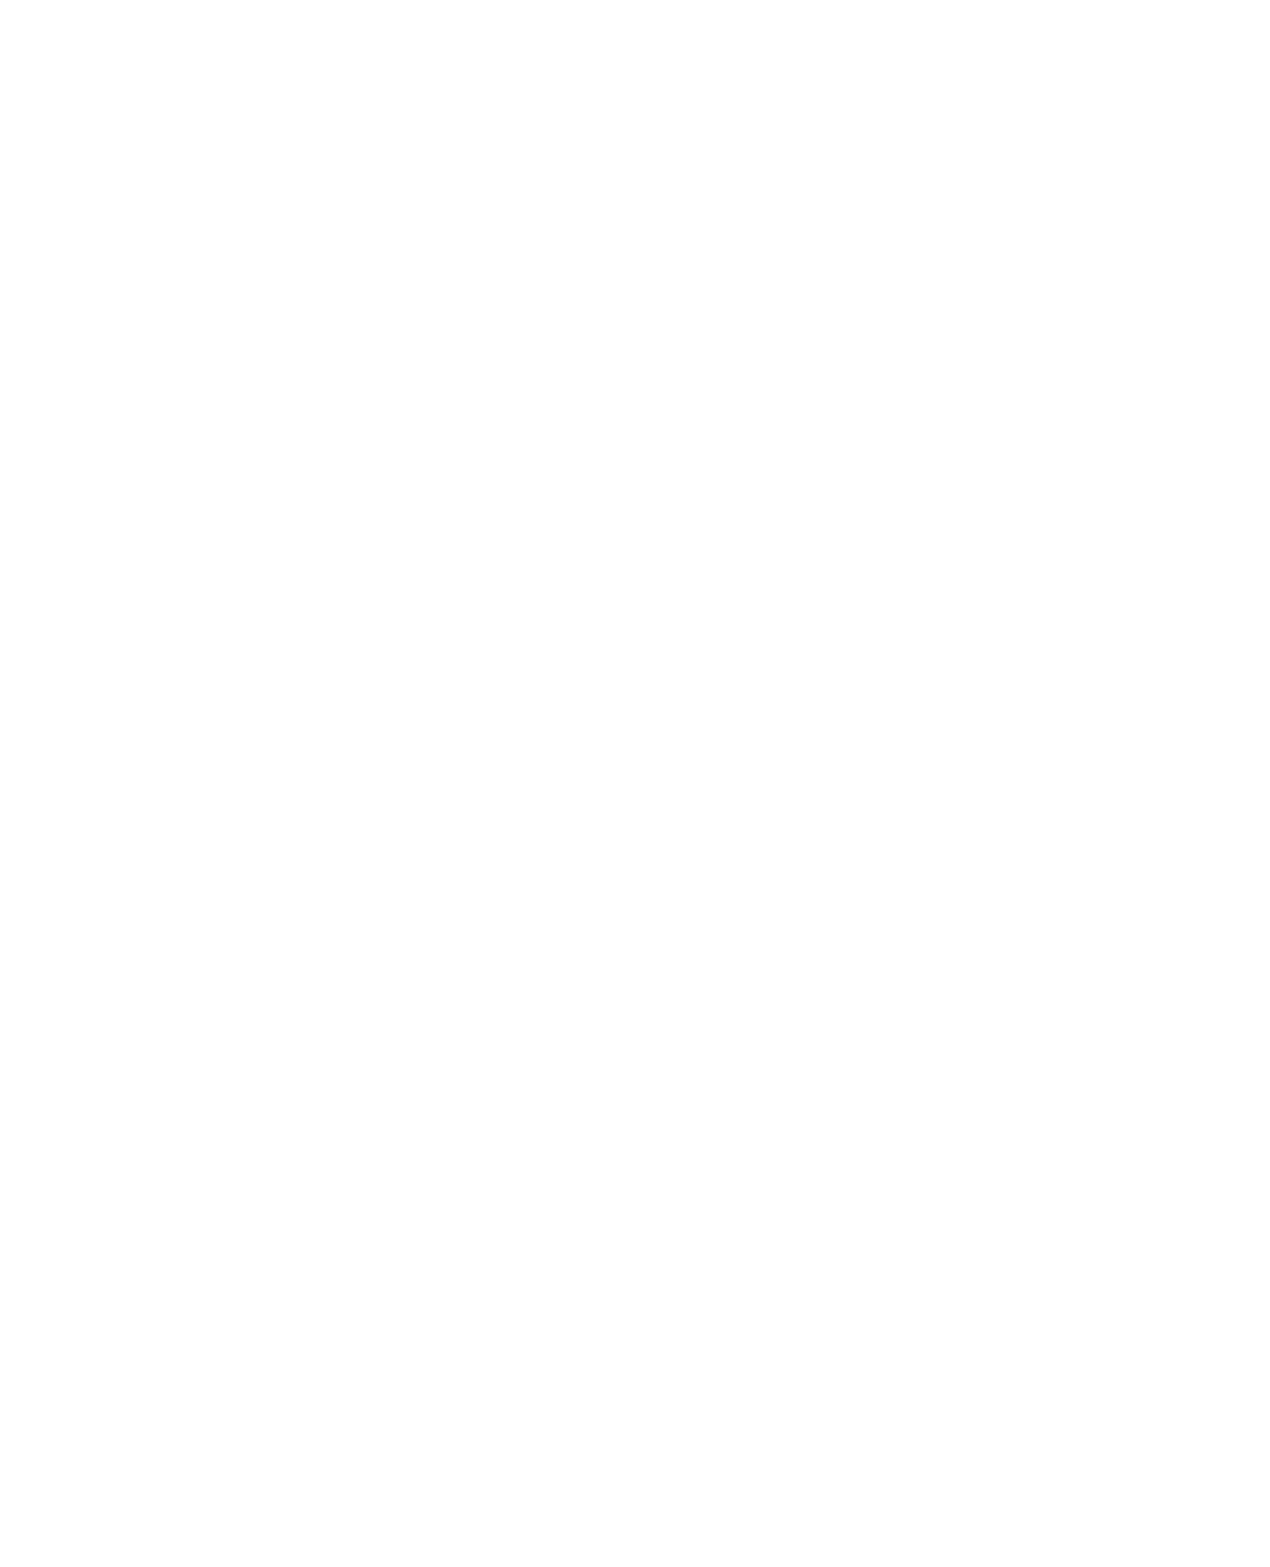 Helios Towers logo for dark backgrounds (transparent PNG)